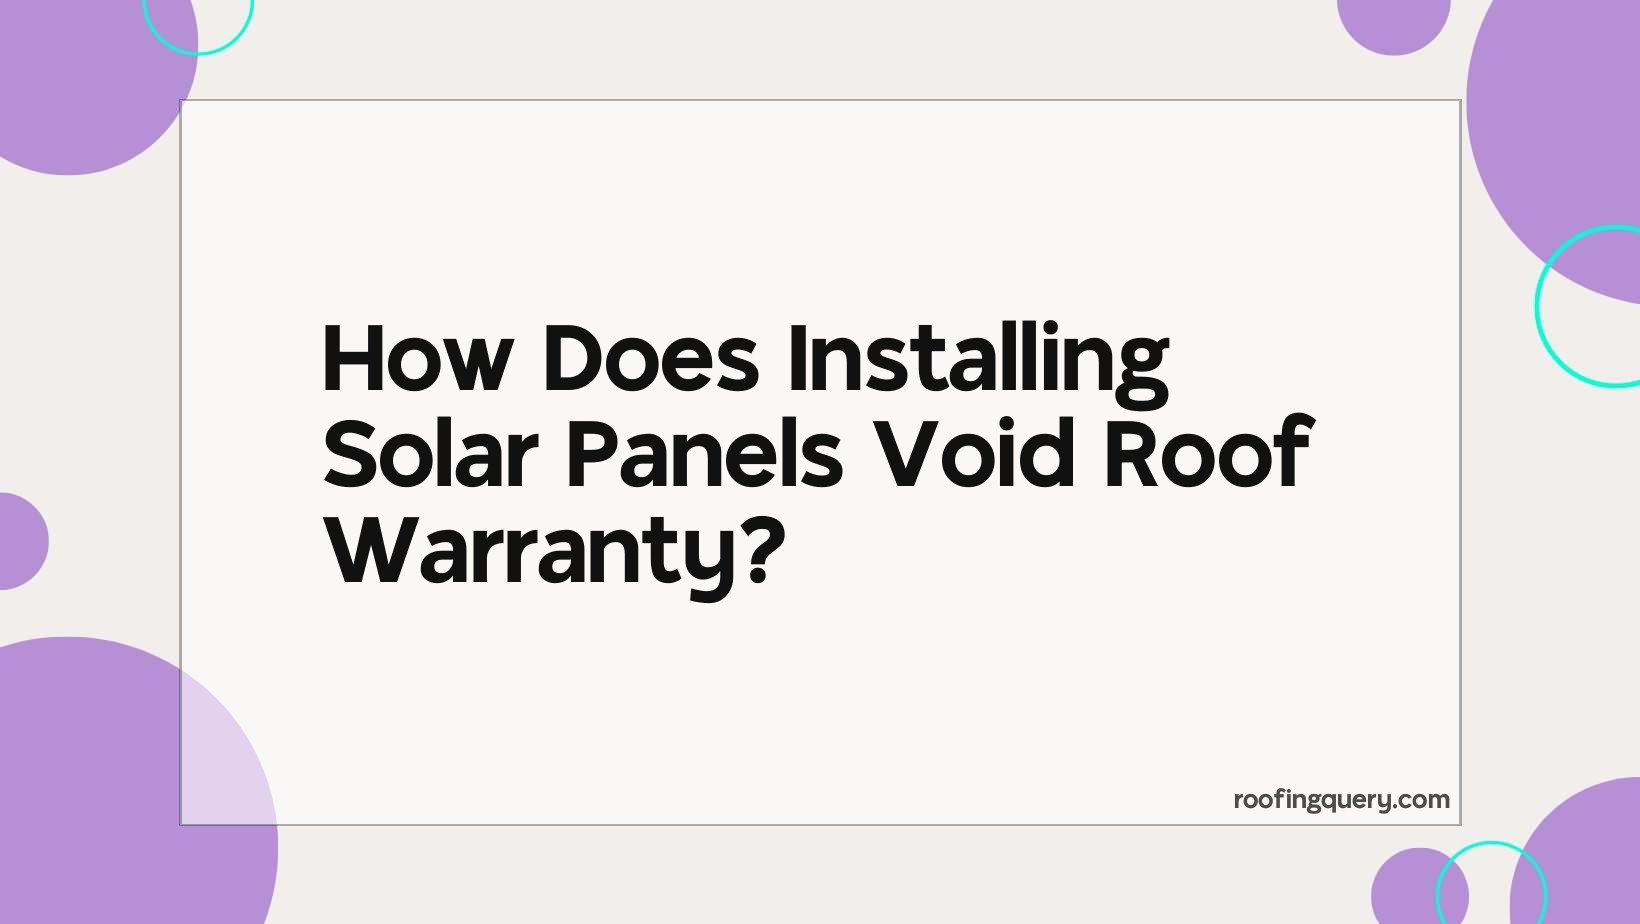 How Does Installing Solar Panels Void Roof Warranty?